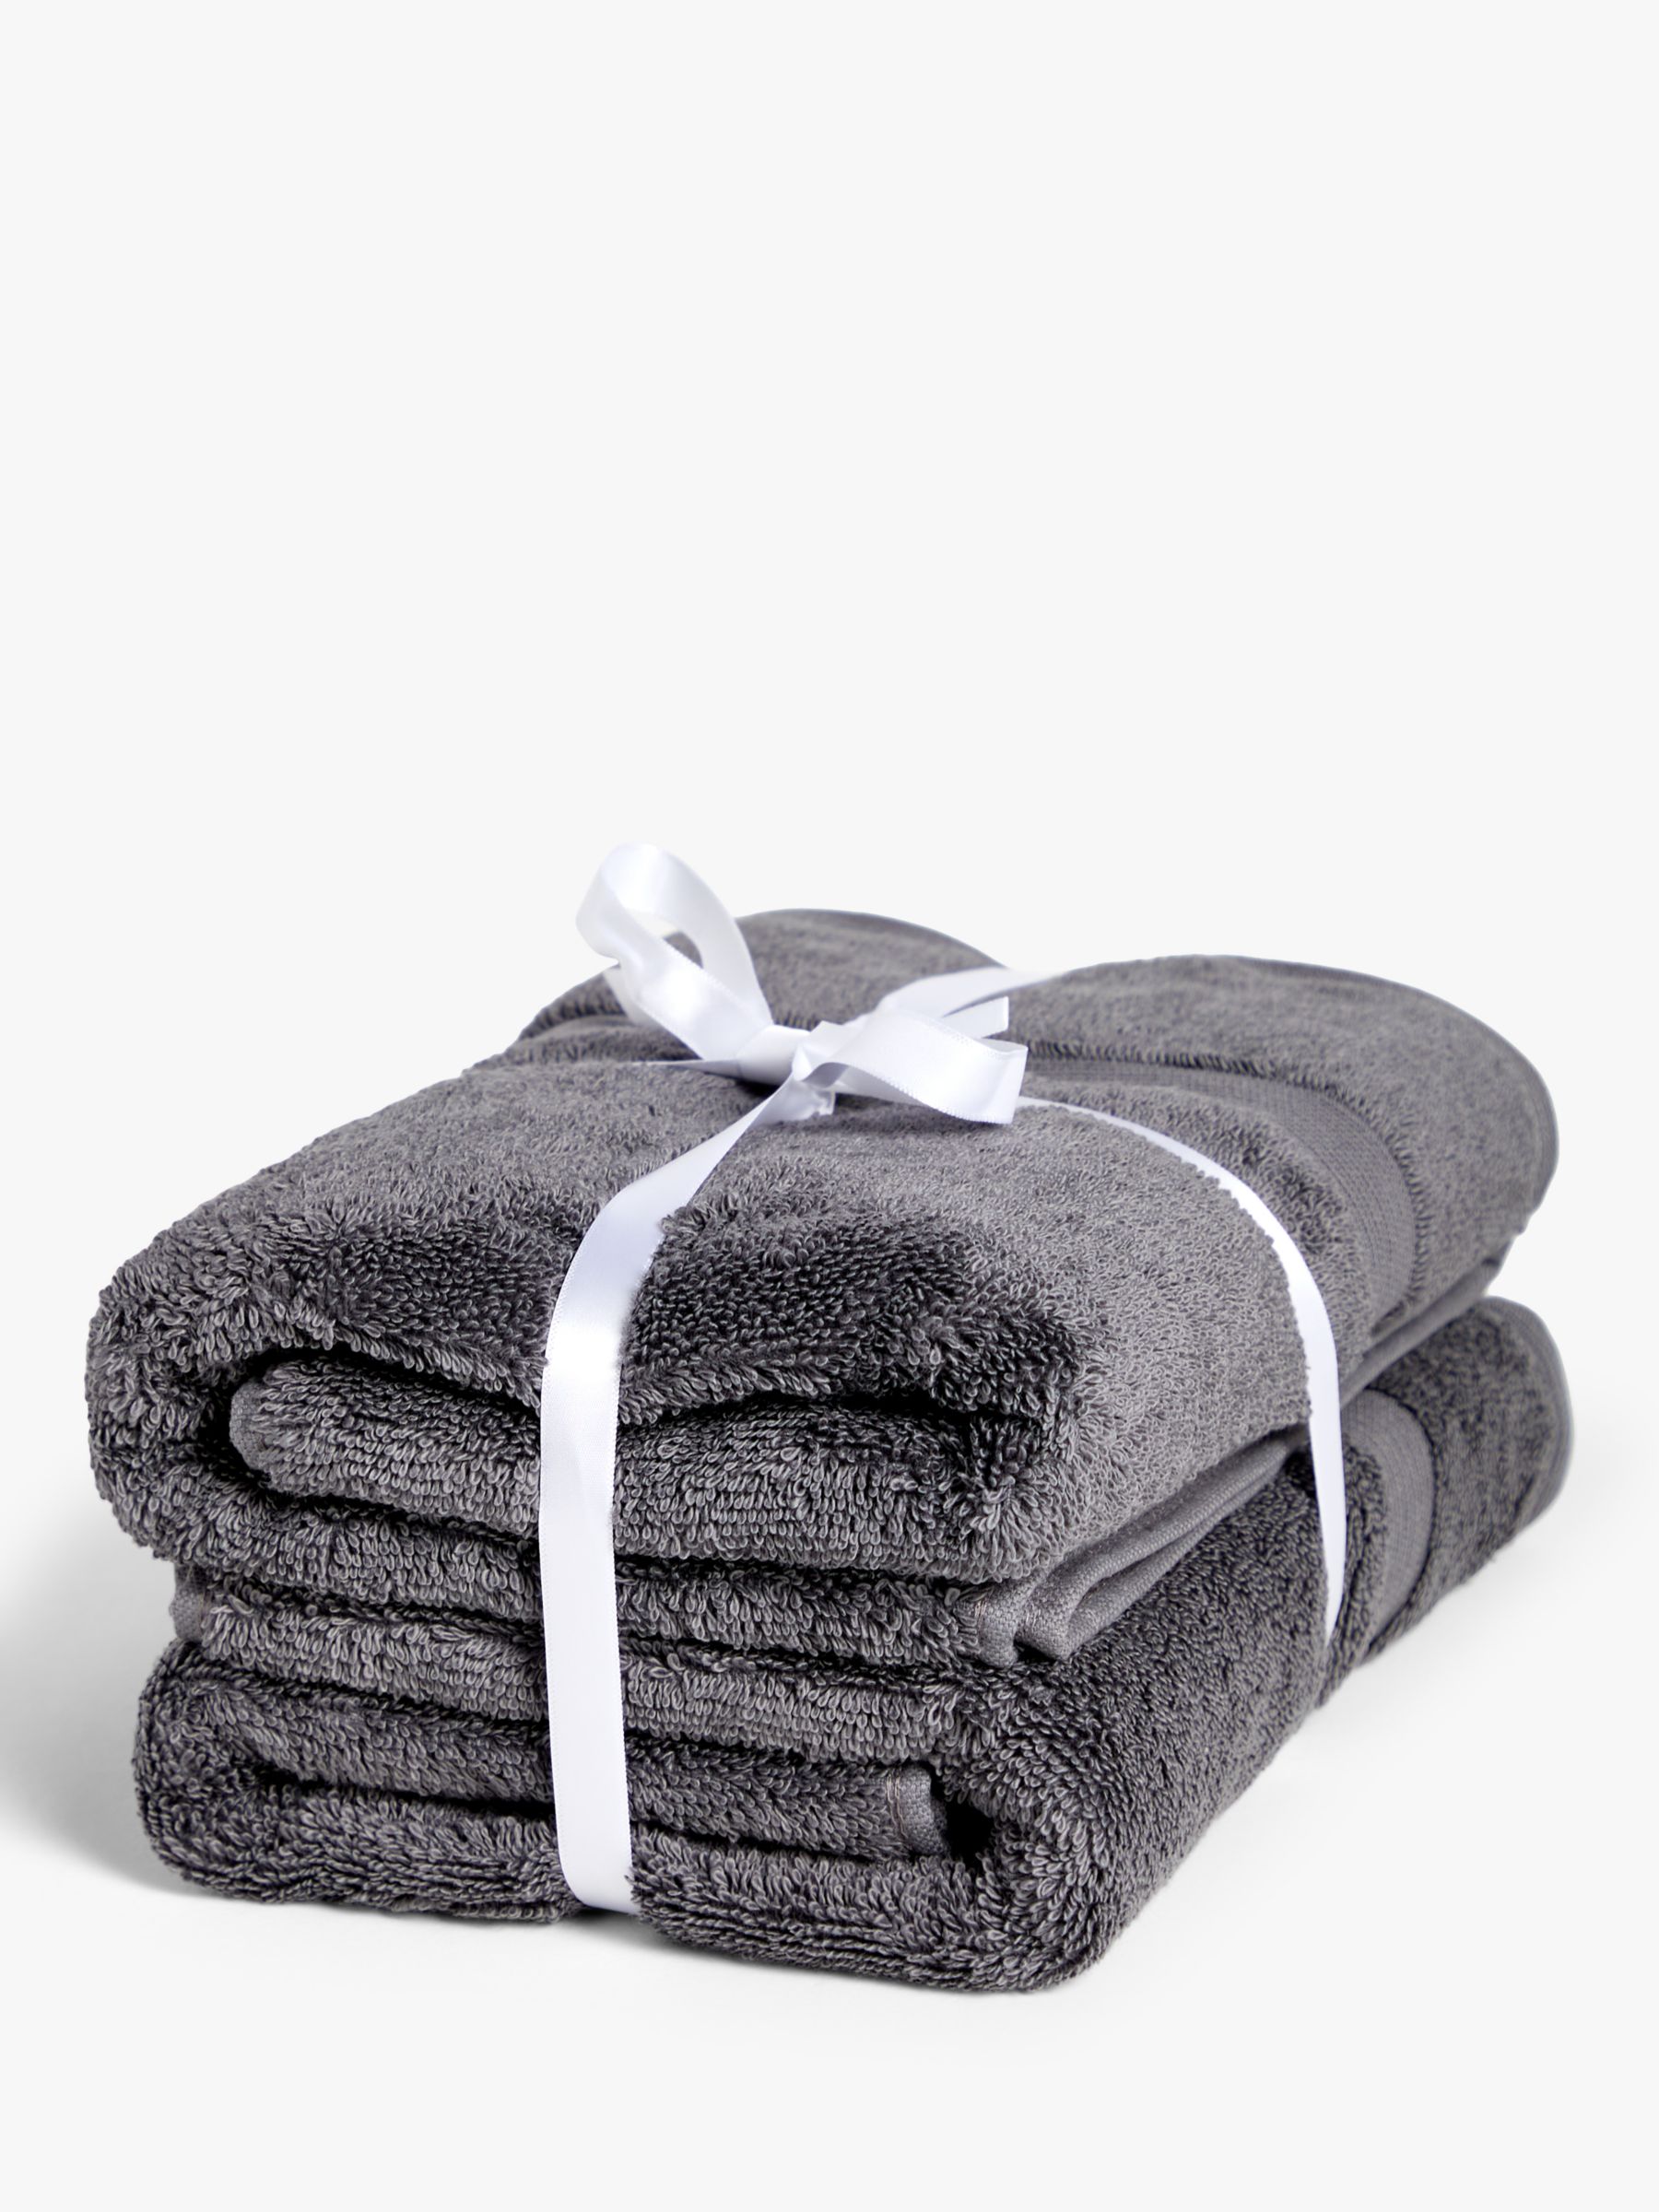 John Lewis & Partners Everyday Egyptian Cotton Towels